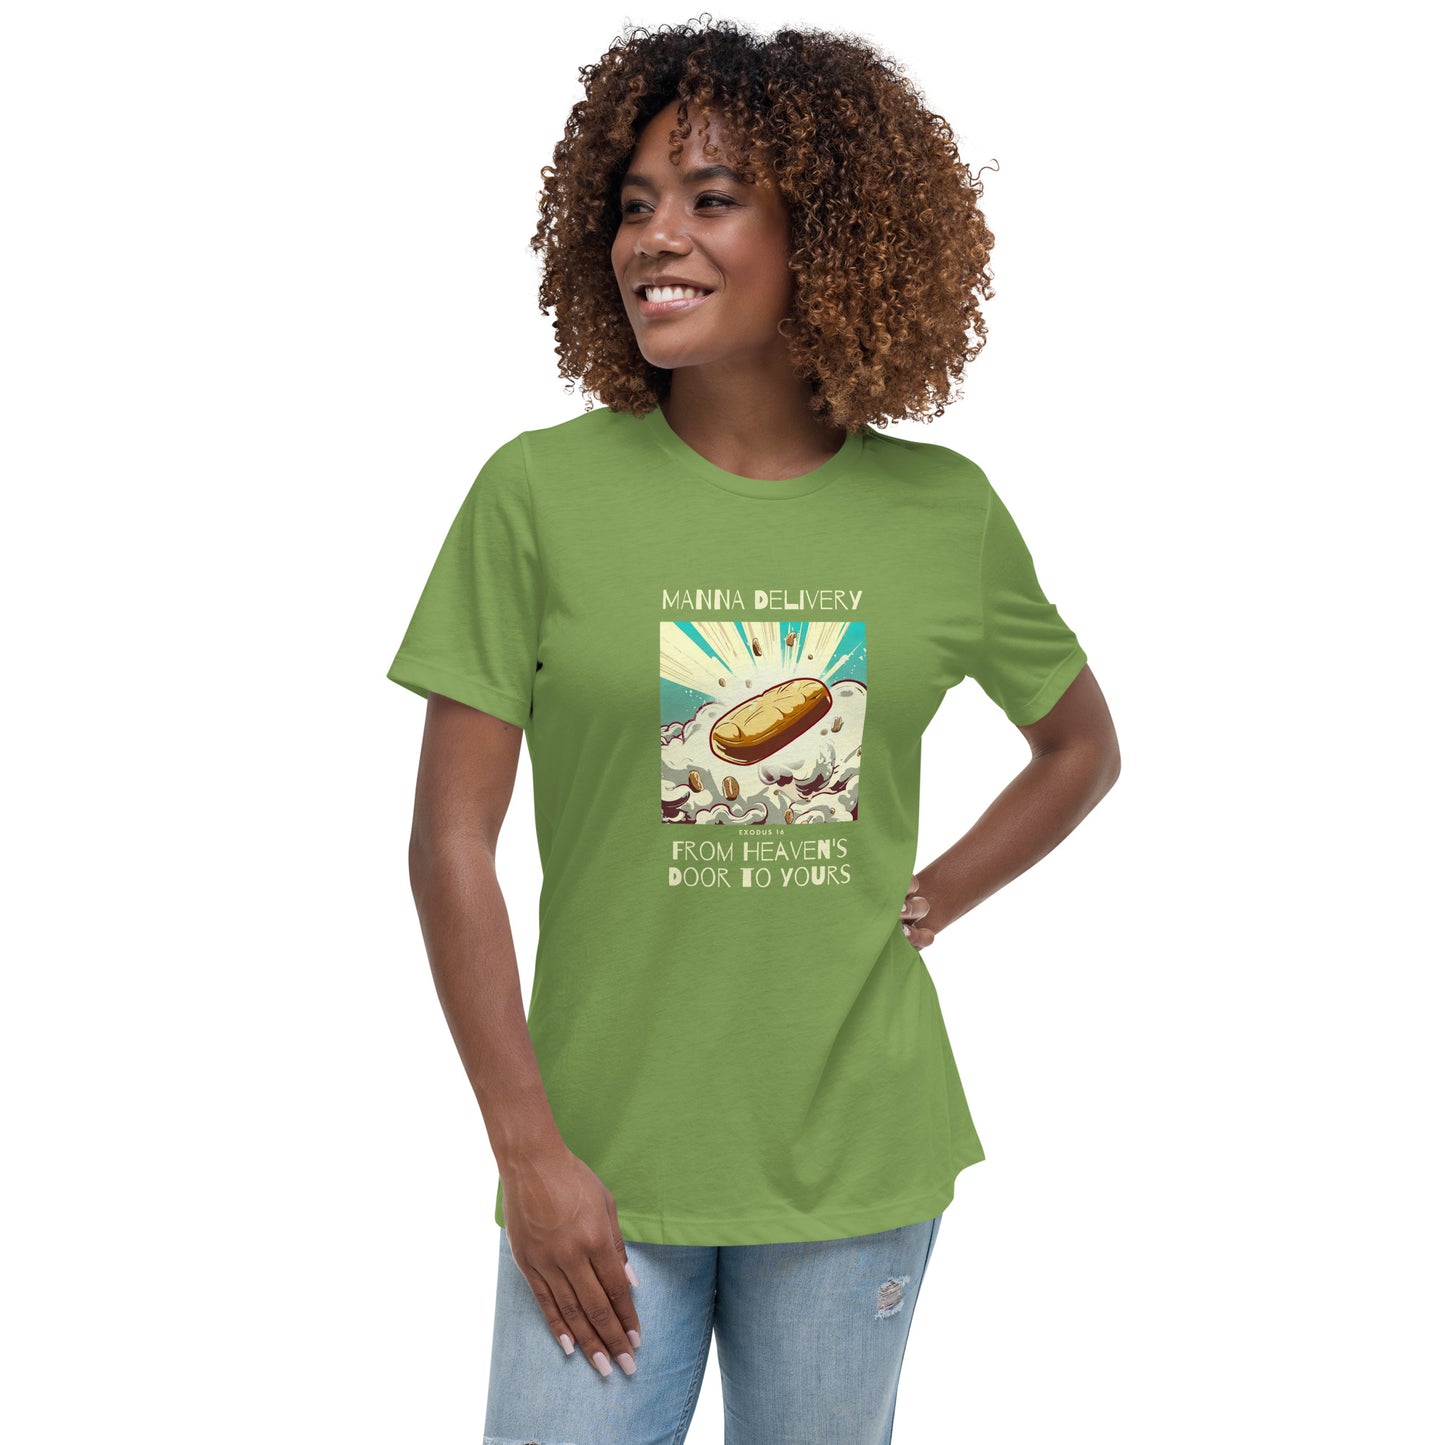 Manna Delivery "From Heaven's Door to Yours" (Yellow Print) Women's Relaxed T-Shirt